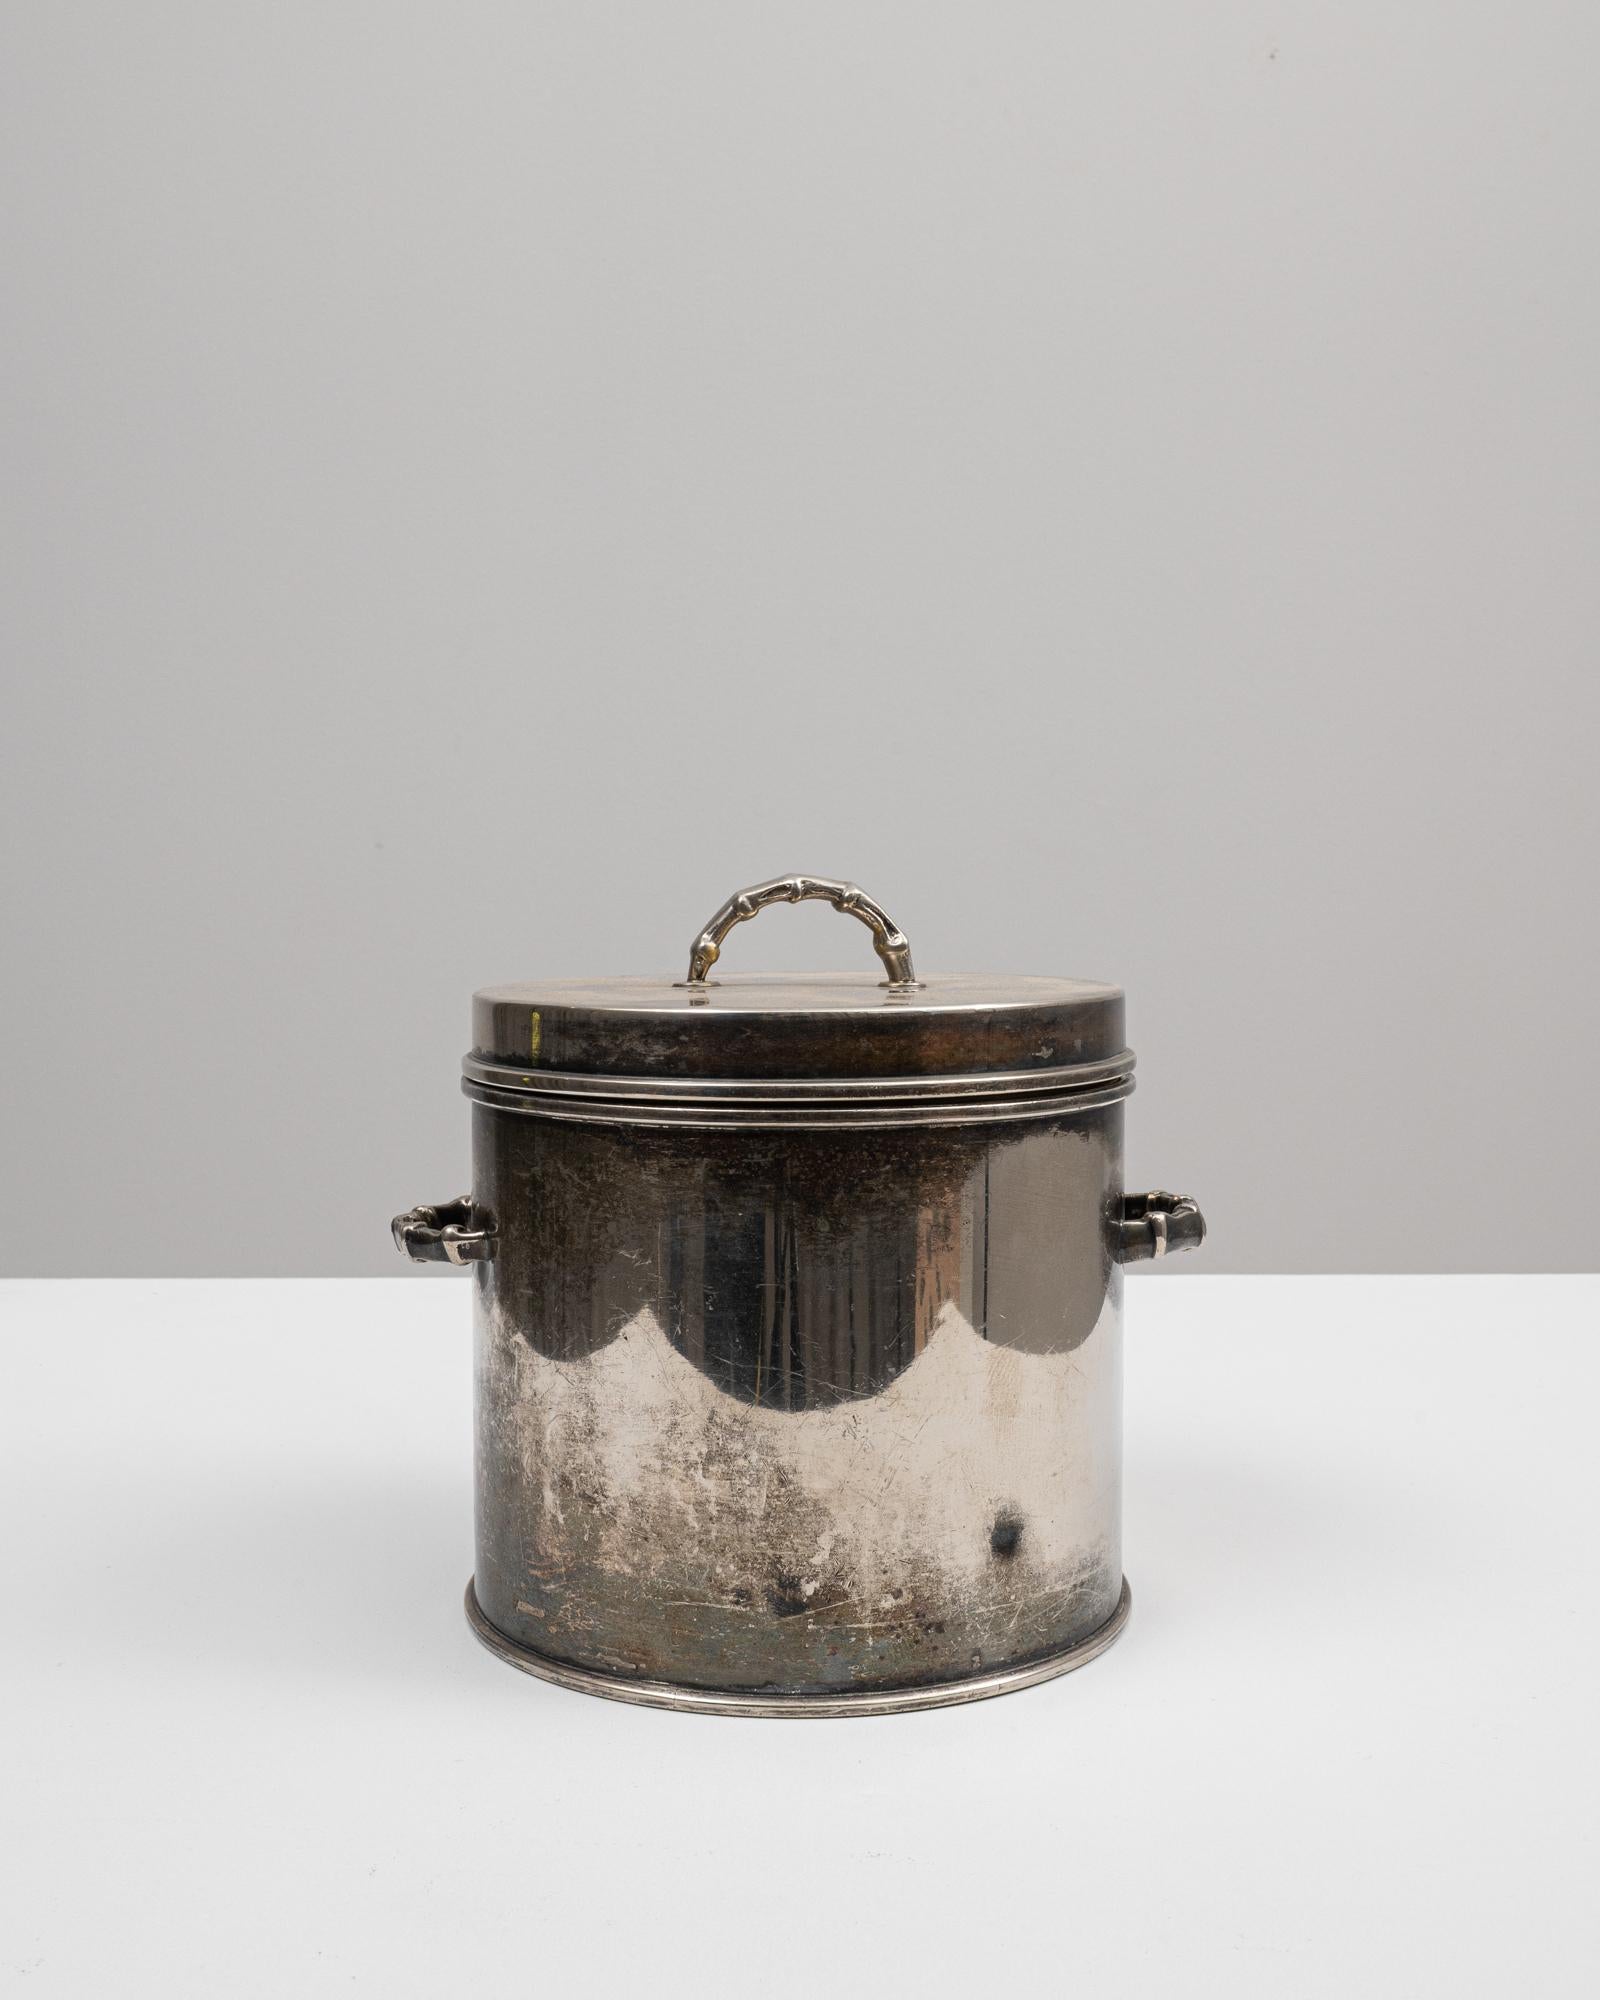 Step back in time with this authentic 20th Century French Metal Pot complete with its original lid, a testament to the durable and functional design of the past. This robust pot, featuring sturdy handles and a secure-fitting lid, is steeped in a